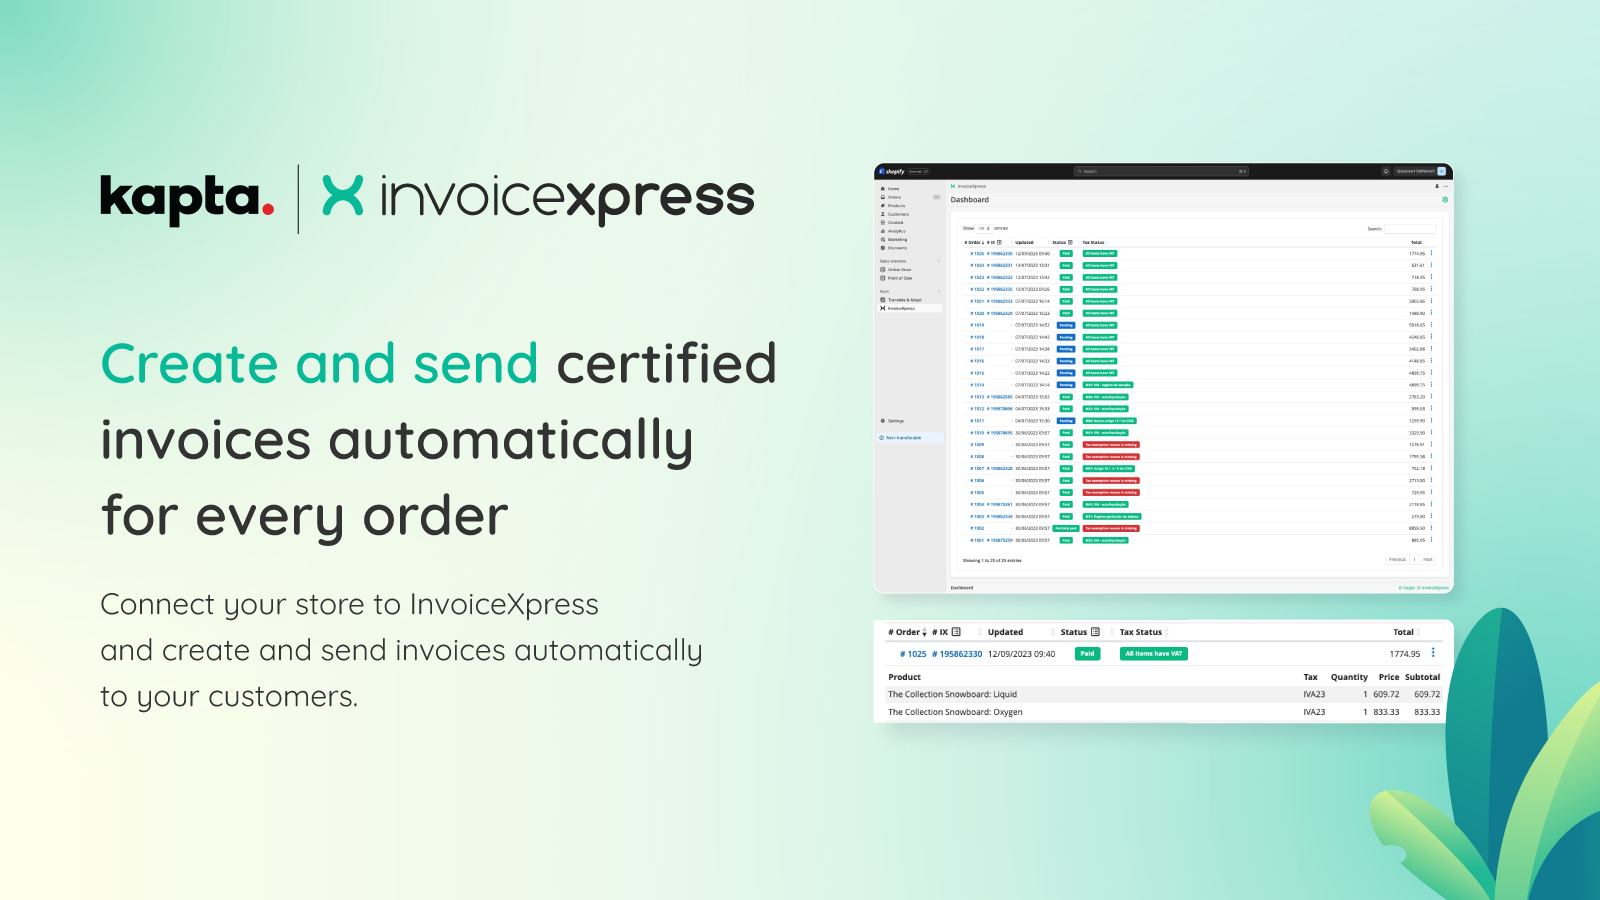 invoicexpress creates and sends certified invoices